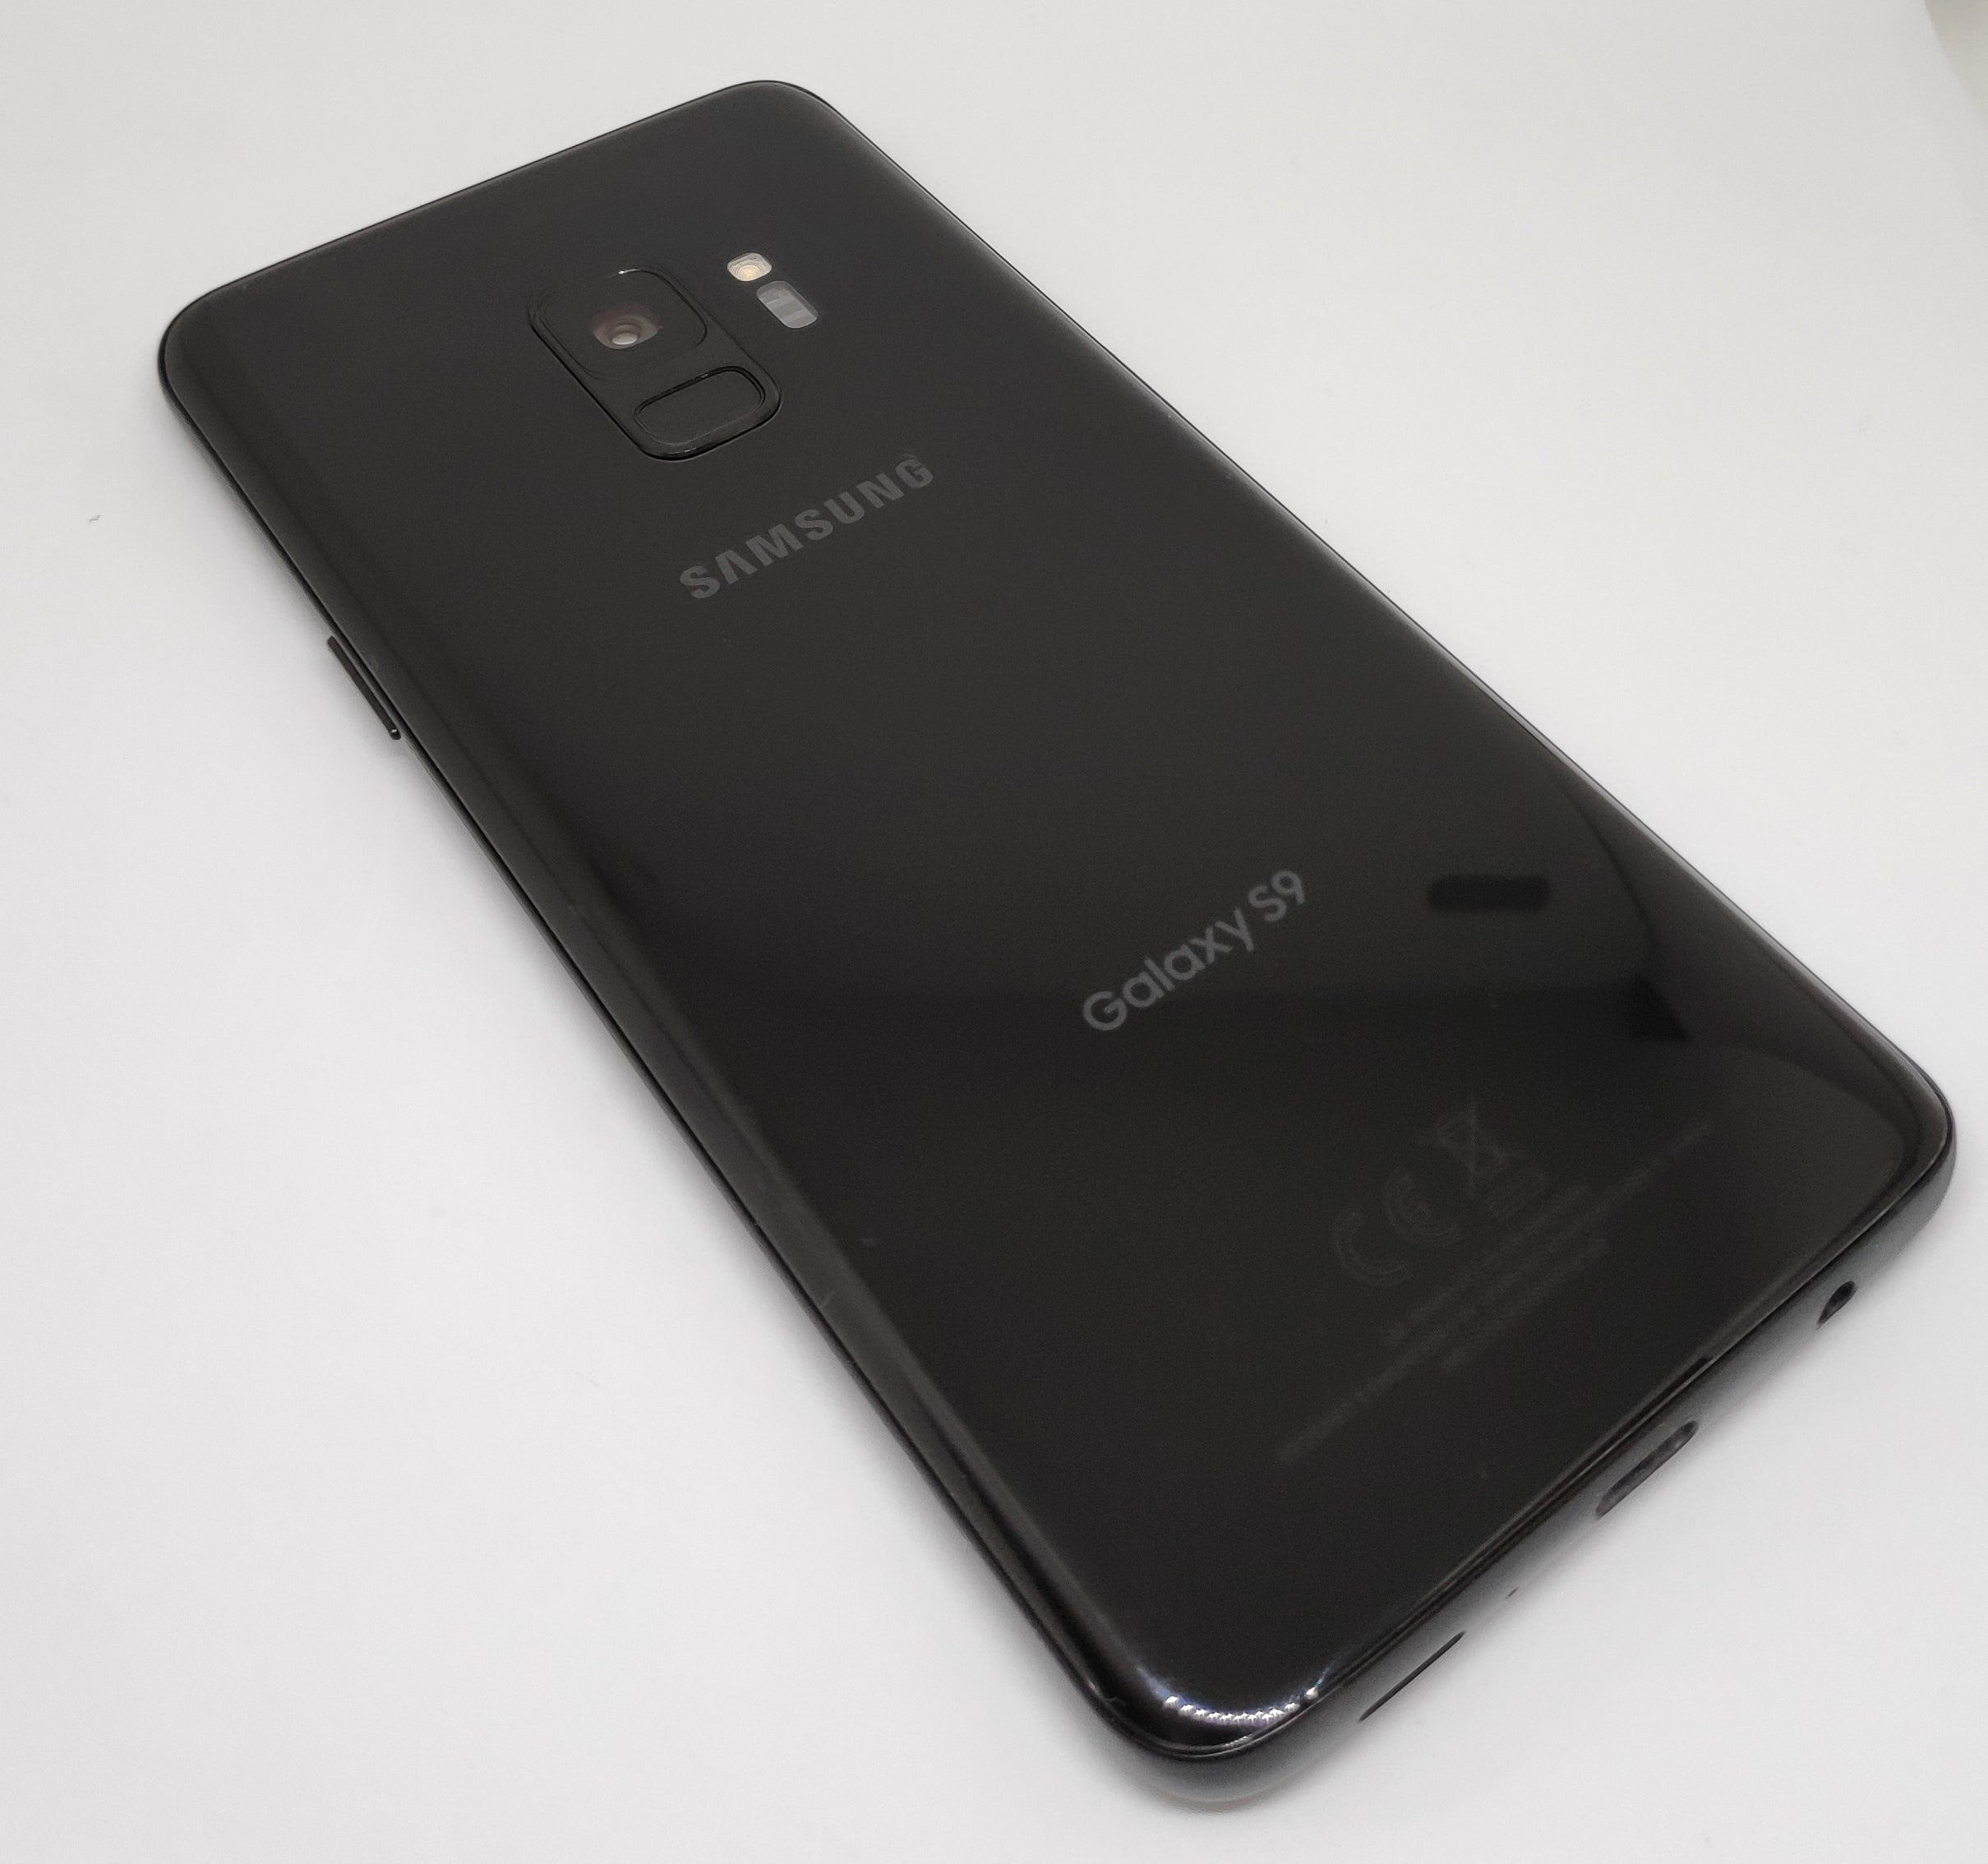 Samsung Galaxy S9 64GB Black (Good) with Case, Glass Protector & Shipping